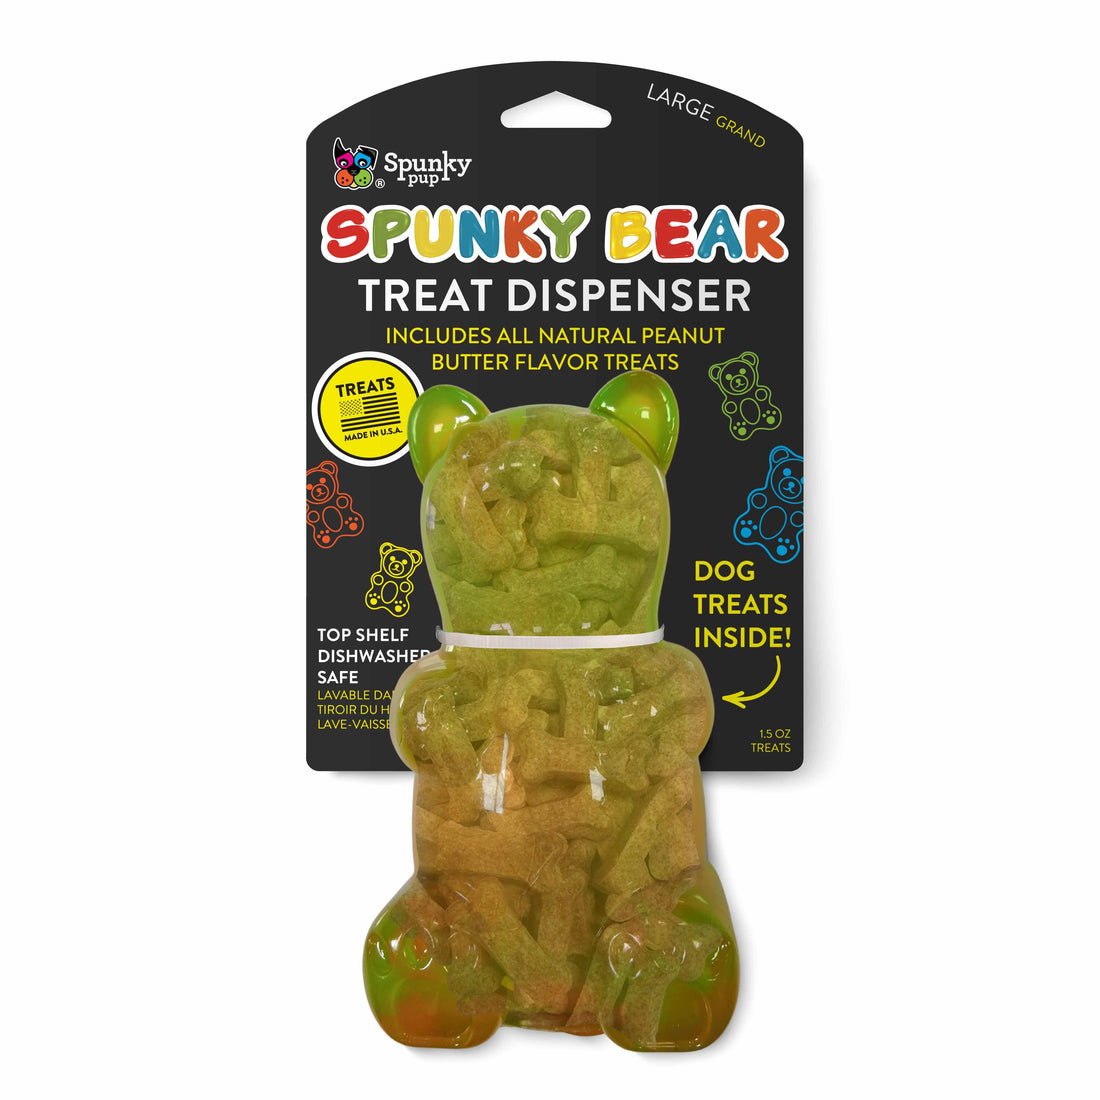 Introducing our new Spunky Bears!